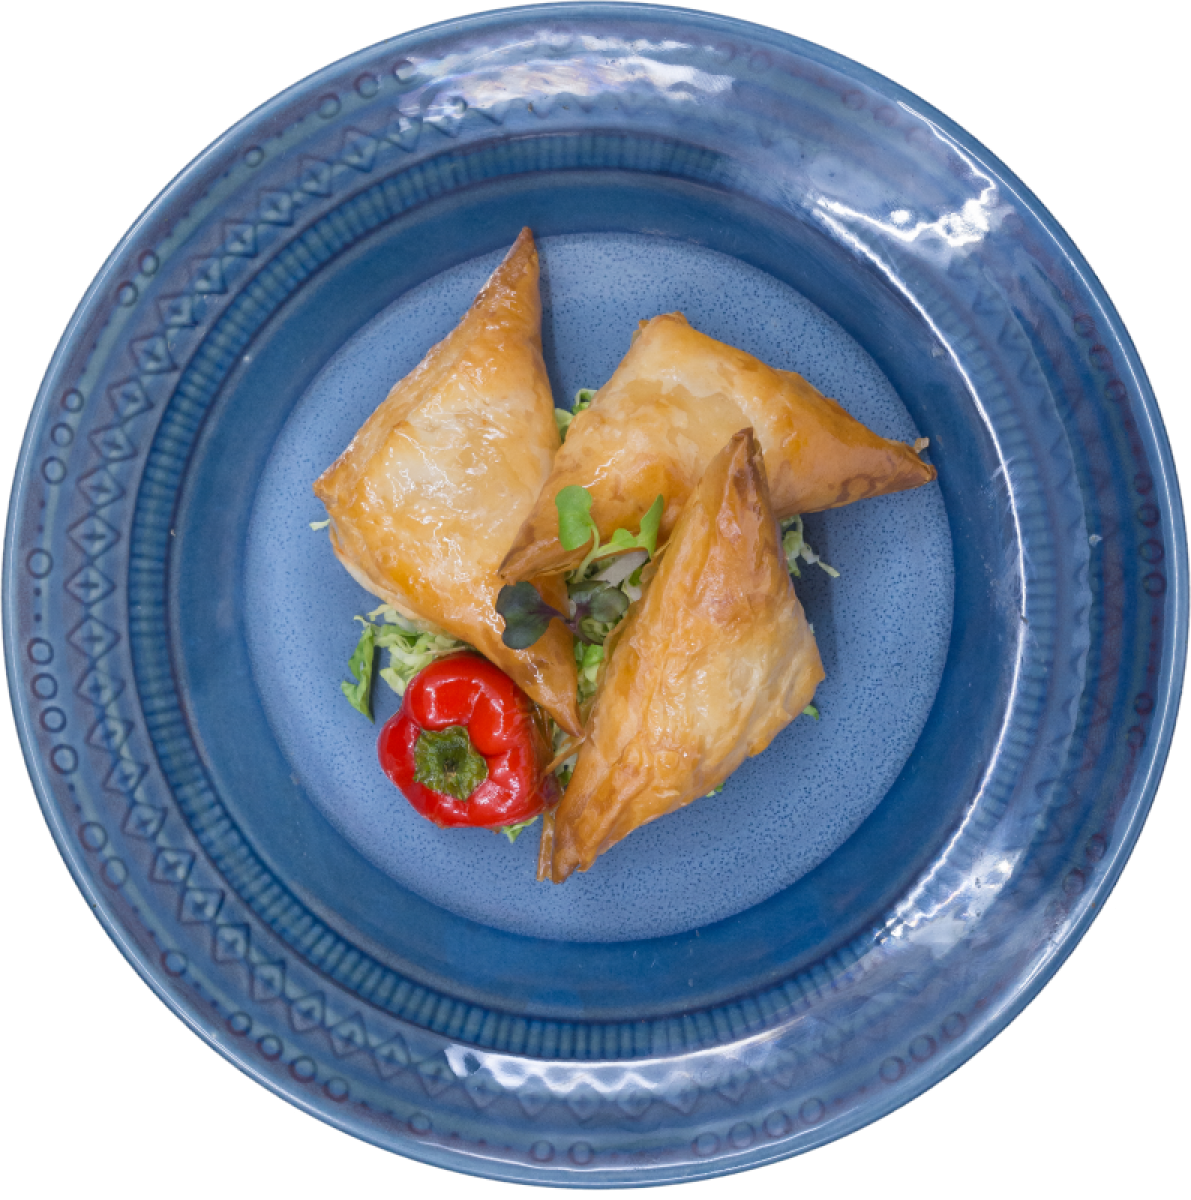 Tiropita | Culinary Specialties - Quality Foods for Hotels, Conventions ...